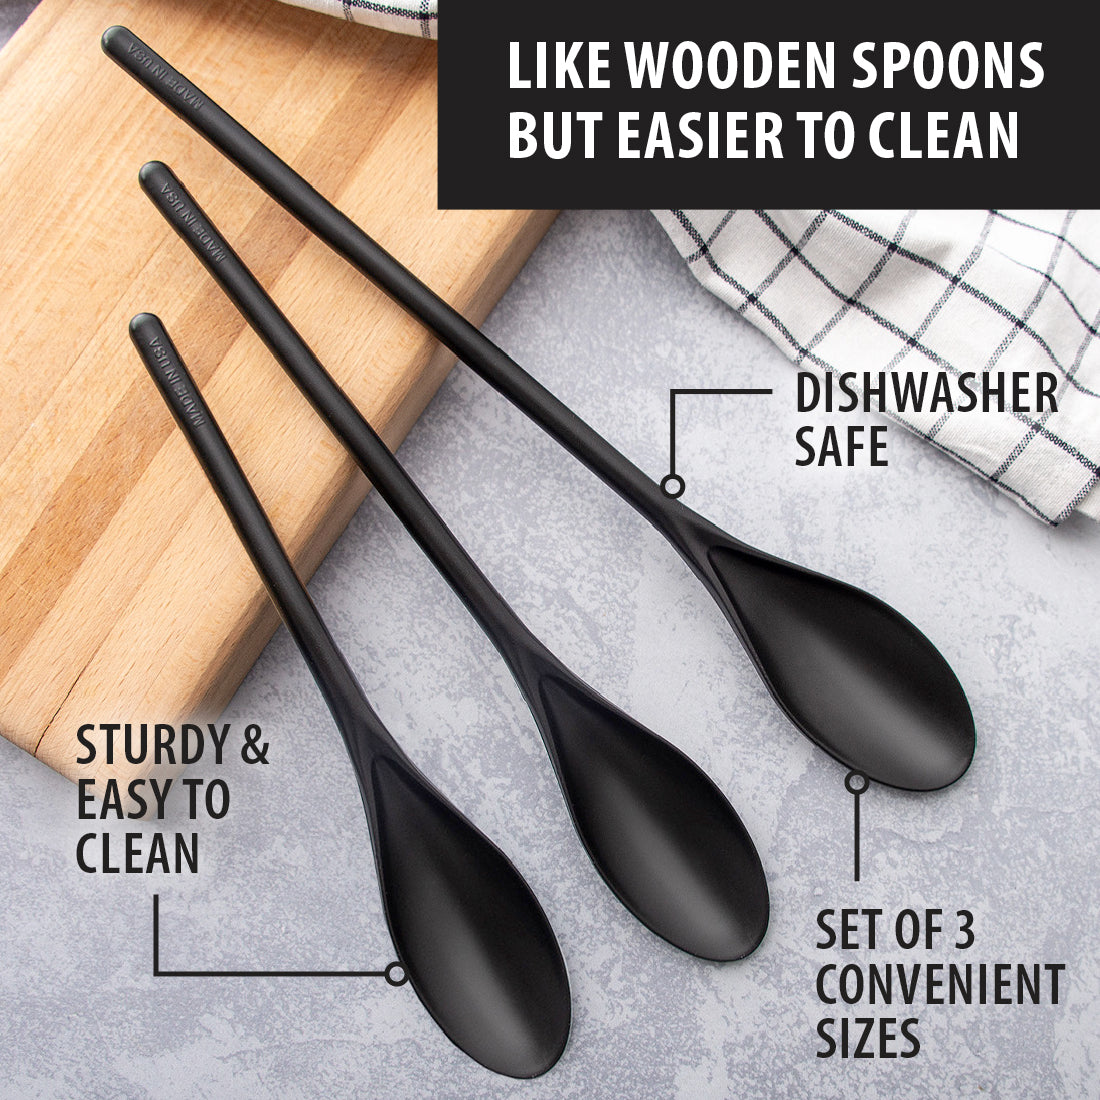 Three Rada Mixing Spoons leaning on a wood cutting board